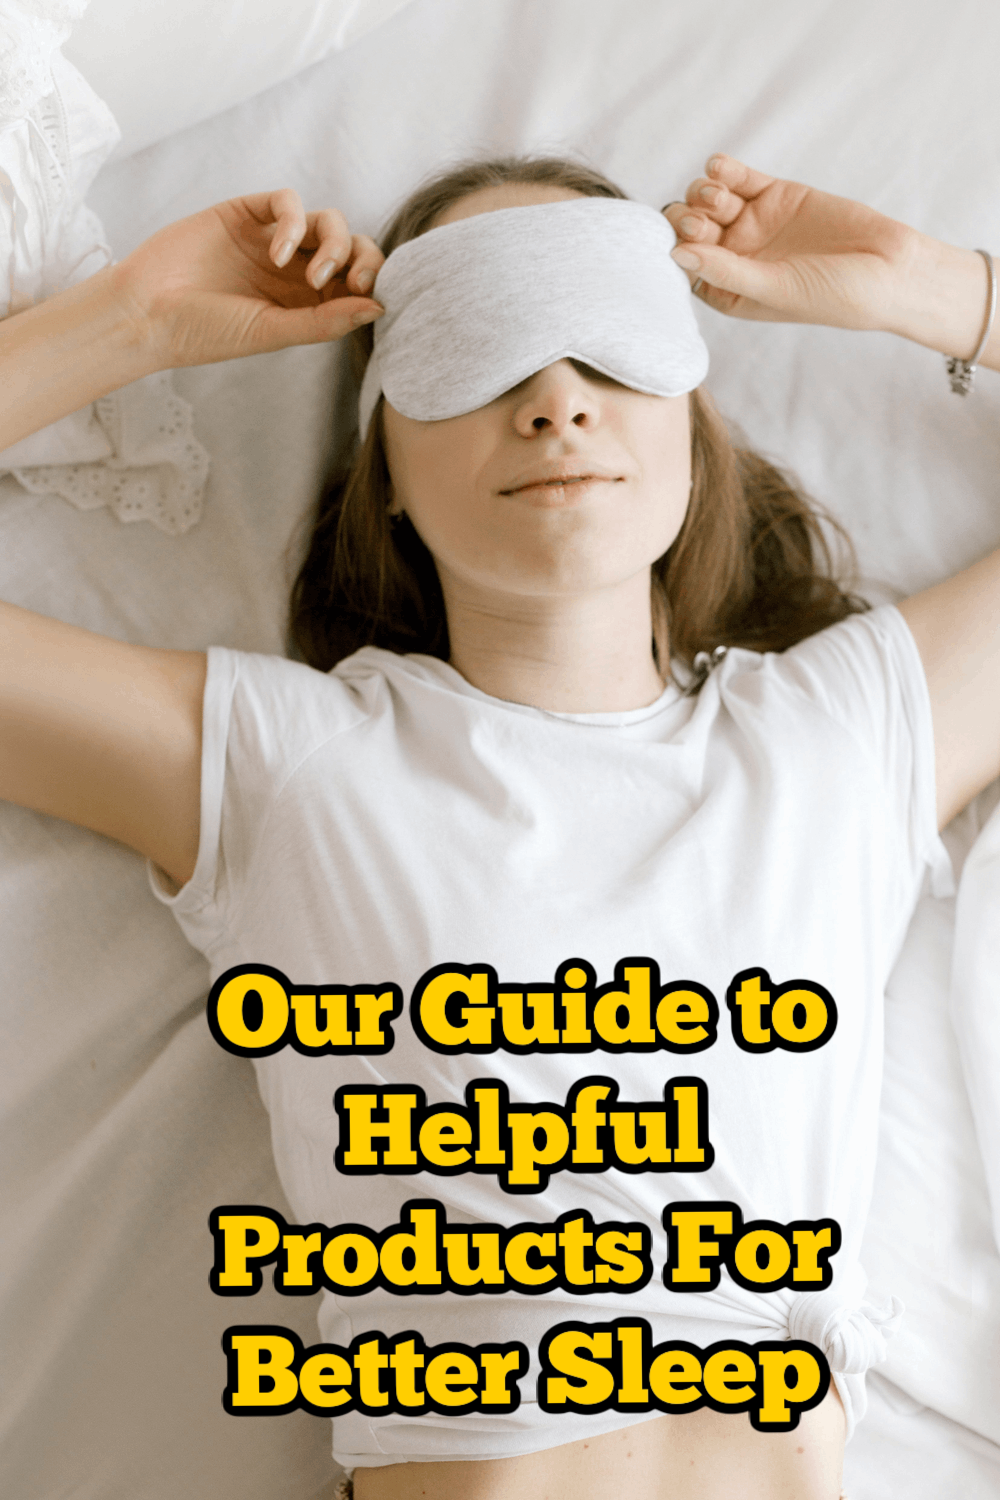 Guide to Helpful Products For Better Sleep